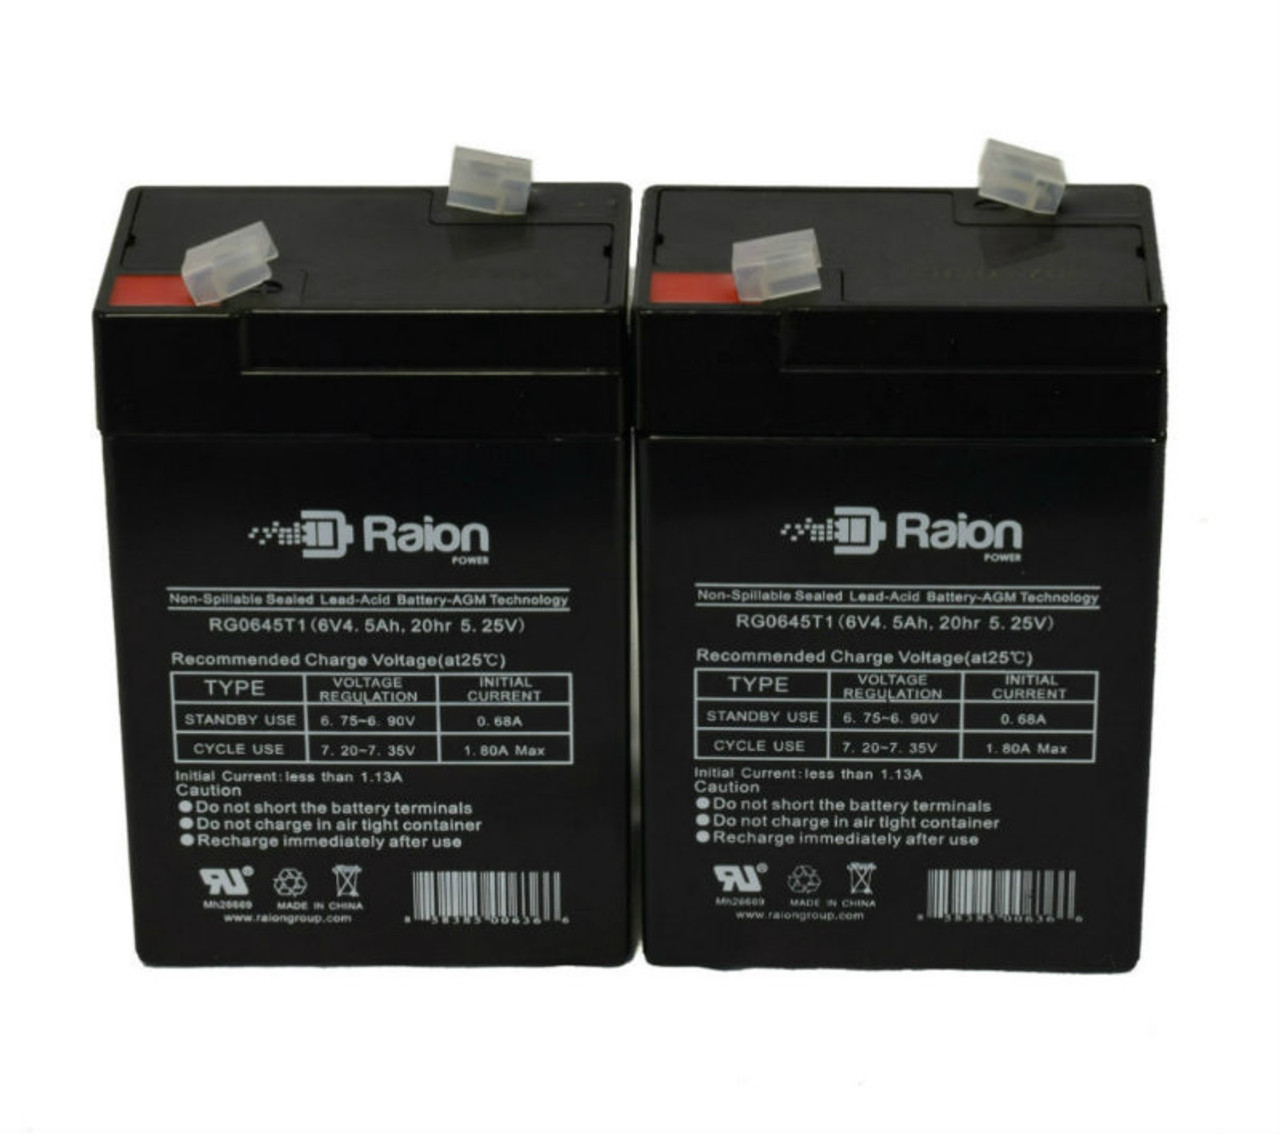 Raion Power 6 Volt 4.5Ah RG0645T1 Replacement Battery for XNB SN06004.5 - 2 Pack